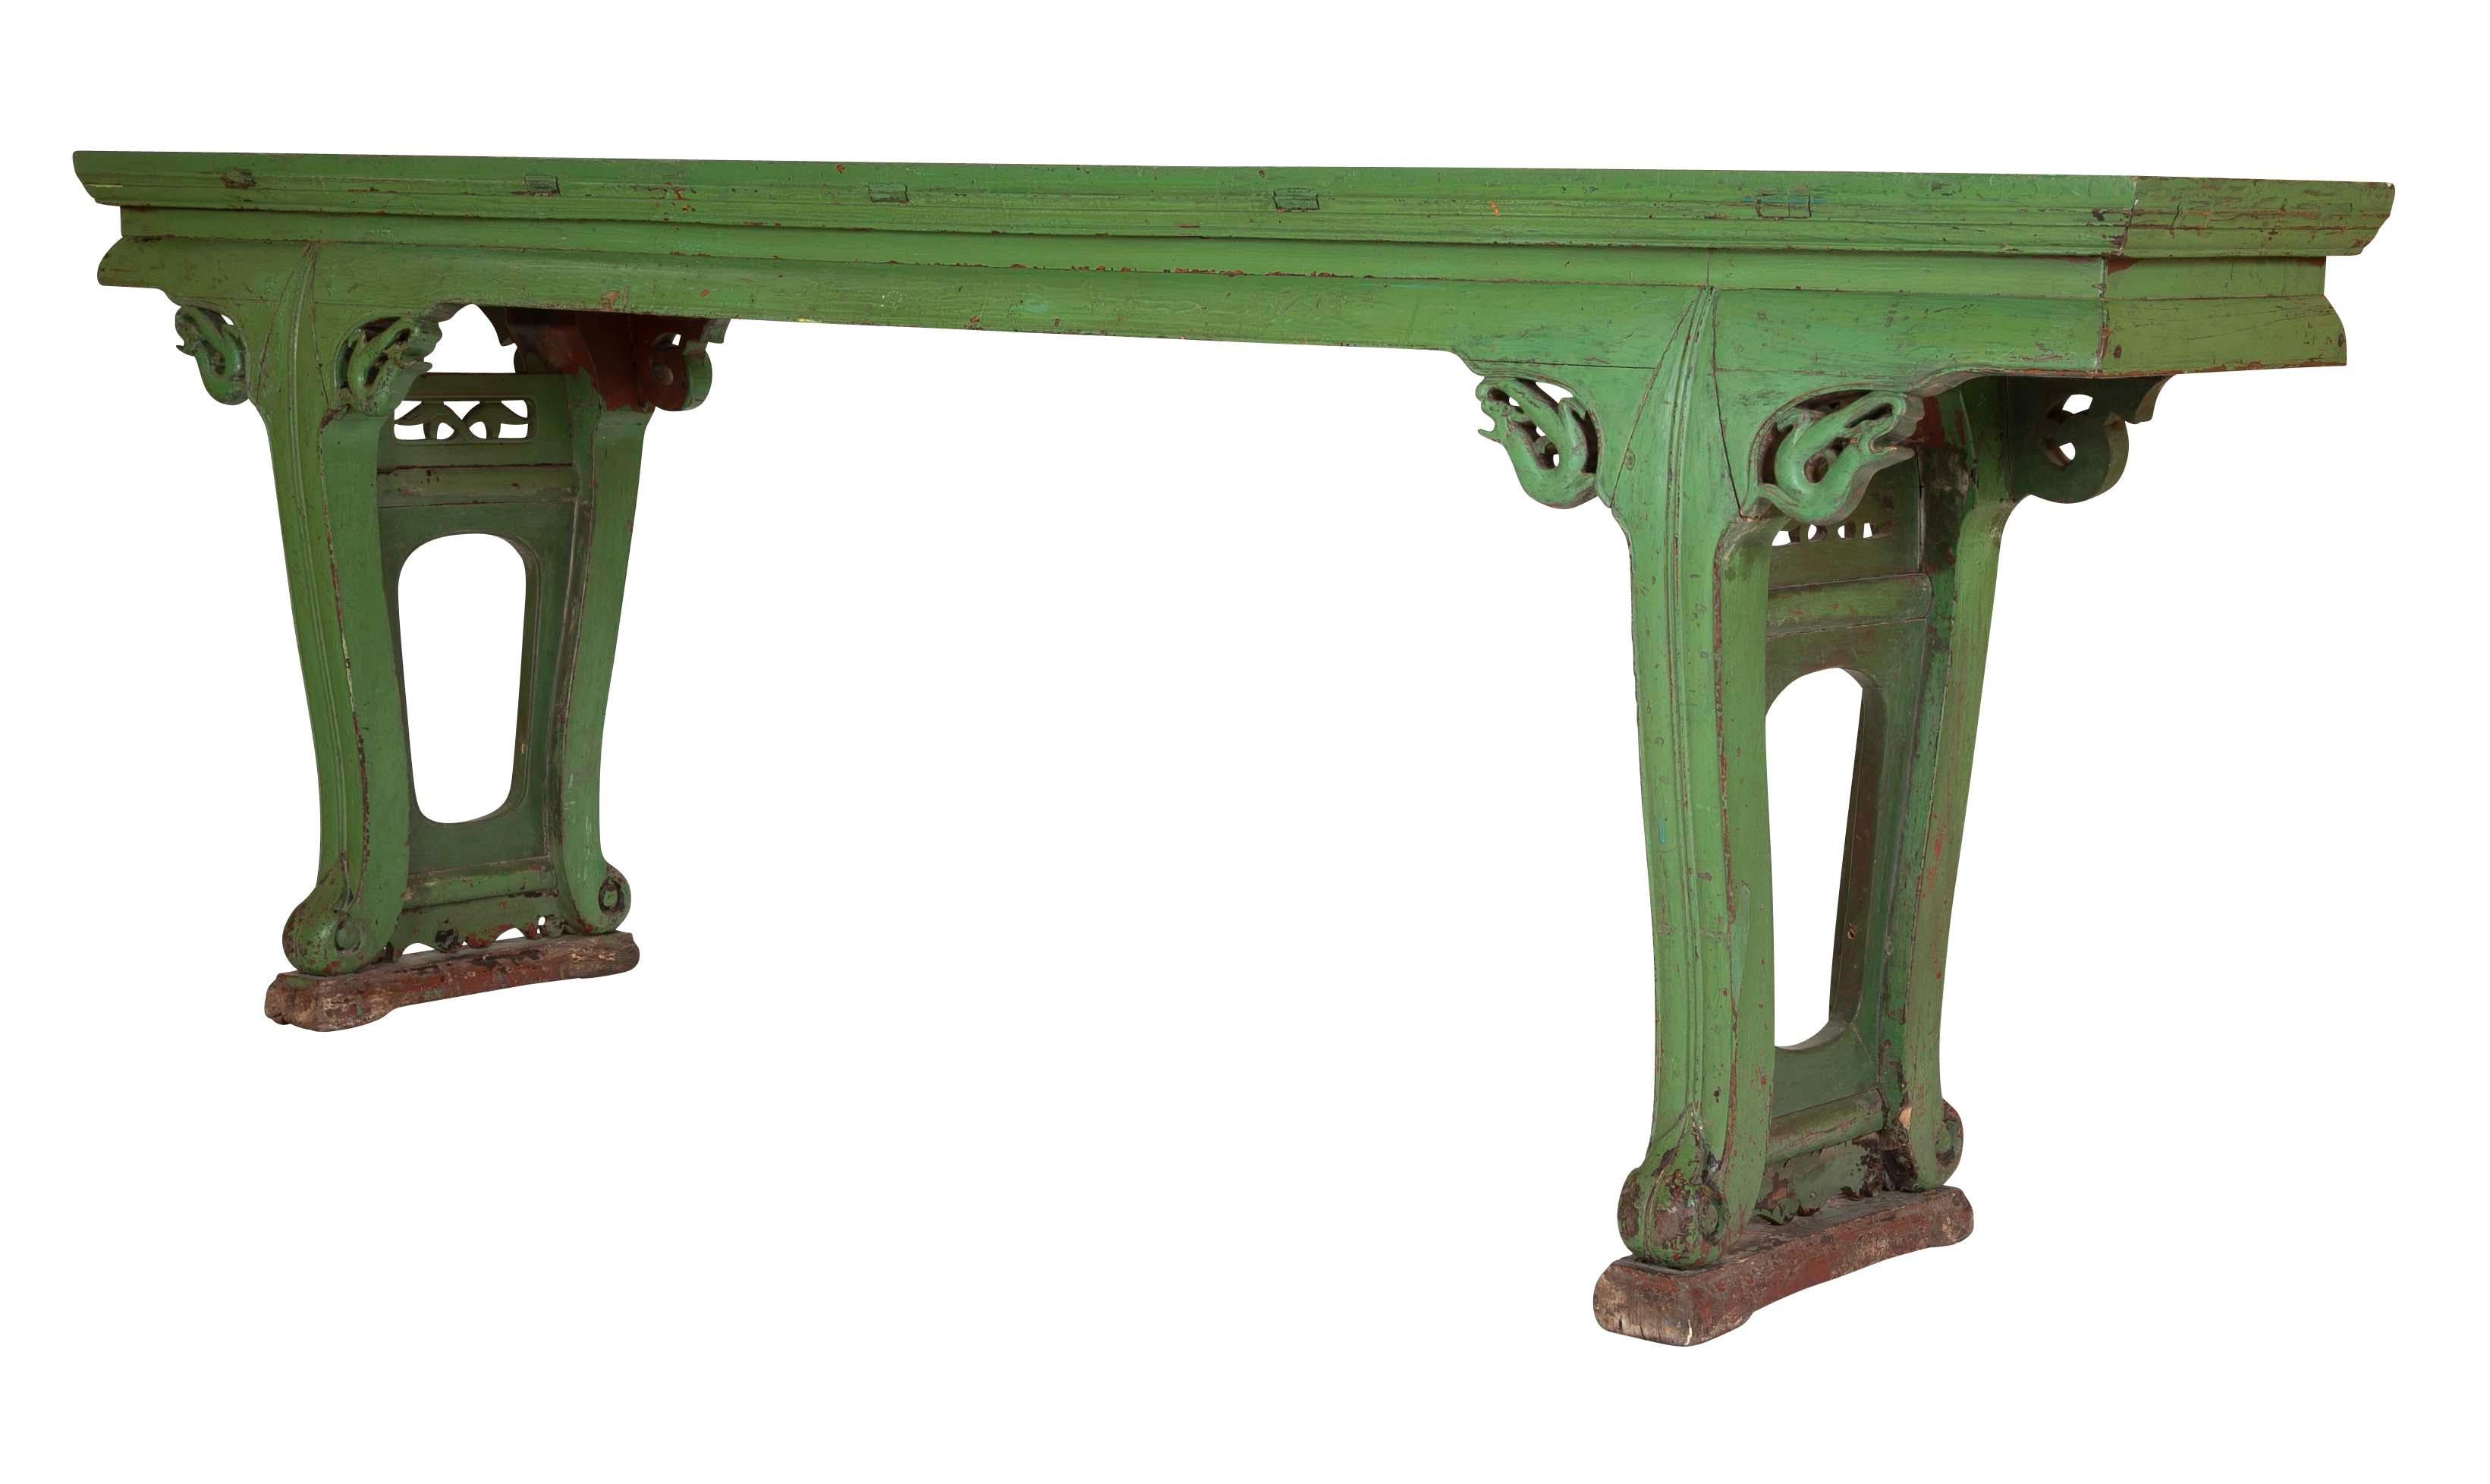 A very decorative 19th century Chinese altar table with apple green paint. Impressive in it's large scale at 8 feet across by 3 feet high, this piece will make a room as a unique console or sofa table. Of classic design with stylized dragons at the